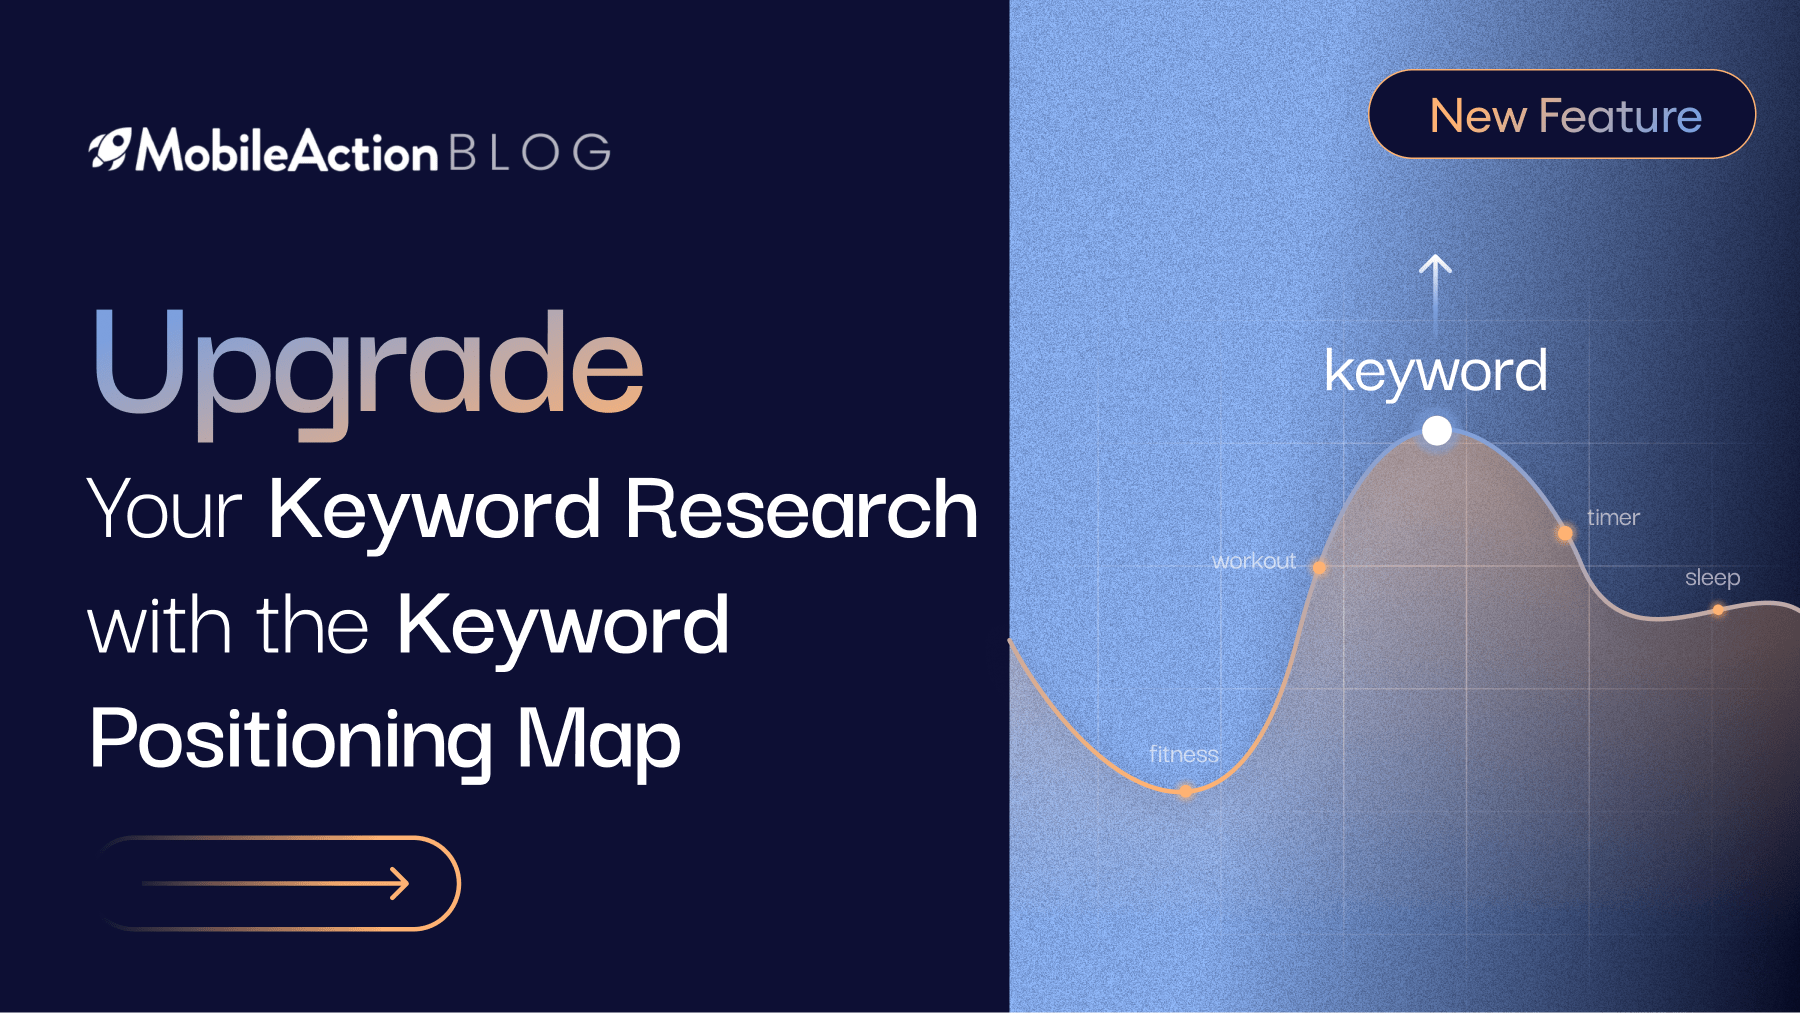 Upgrade Your Keyword Research with the Keyword Positioning Map